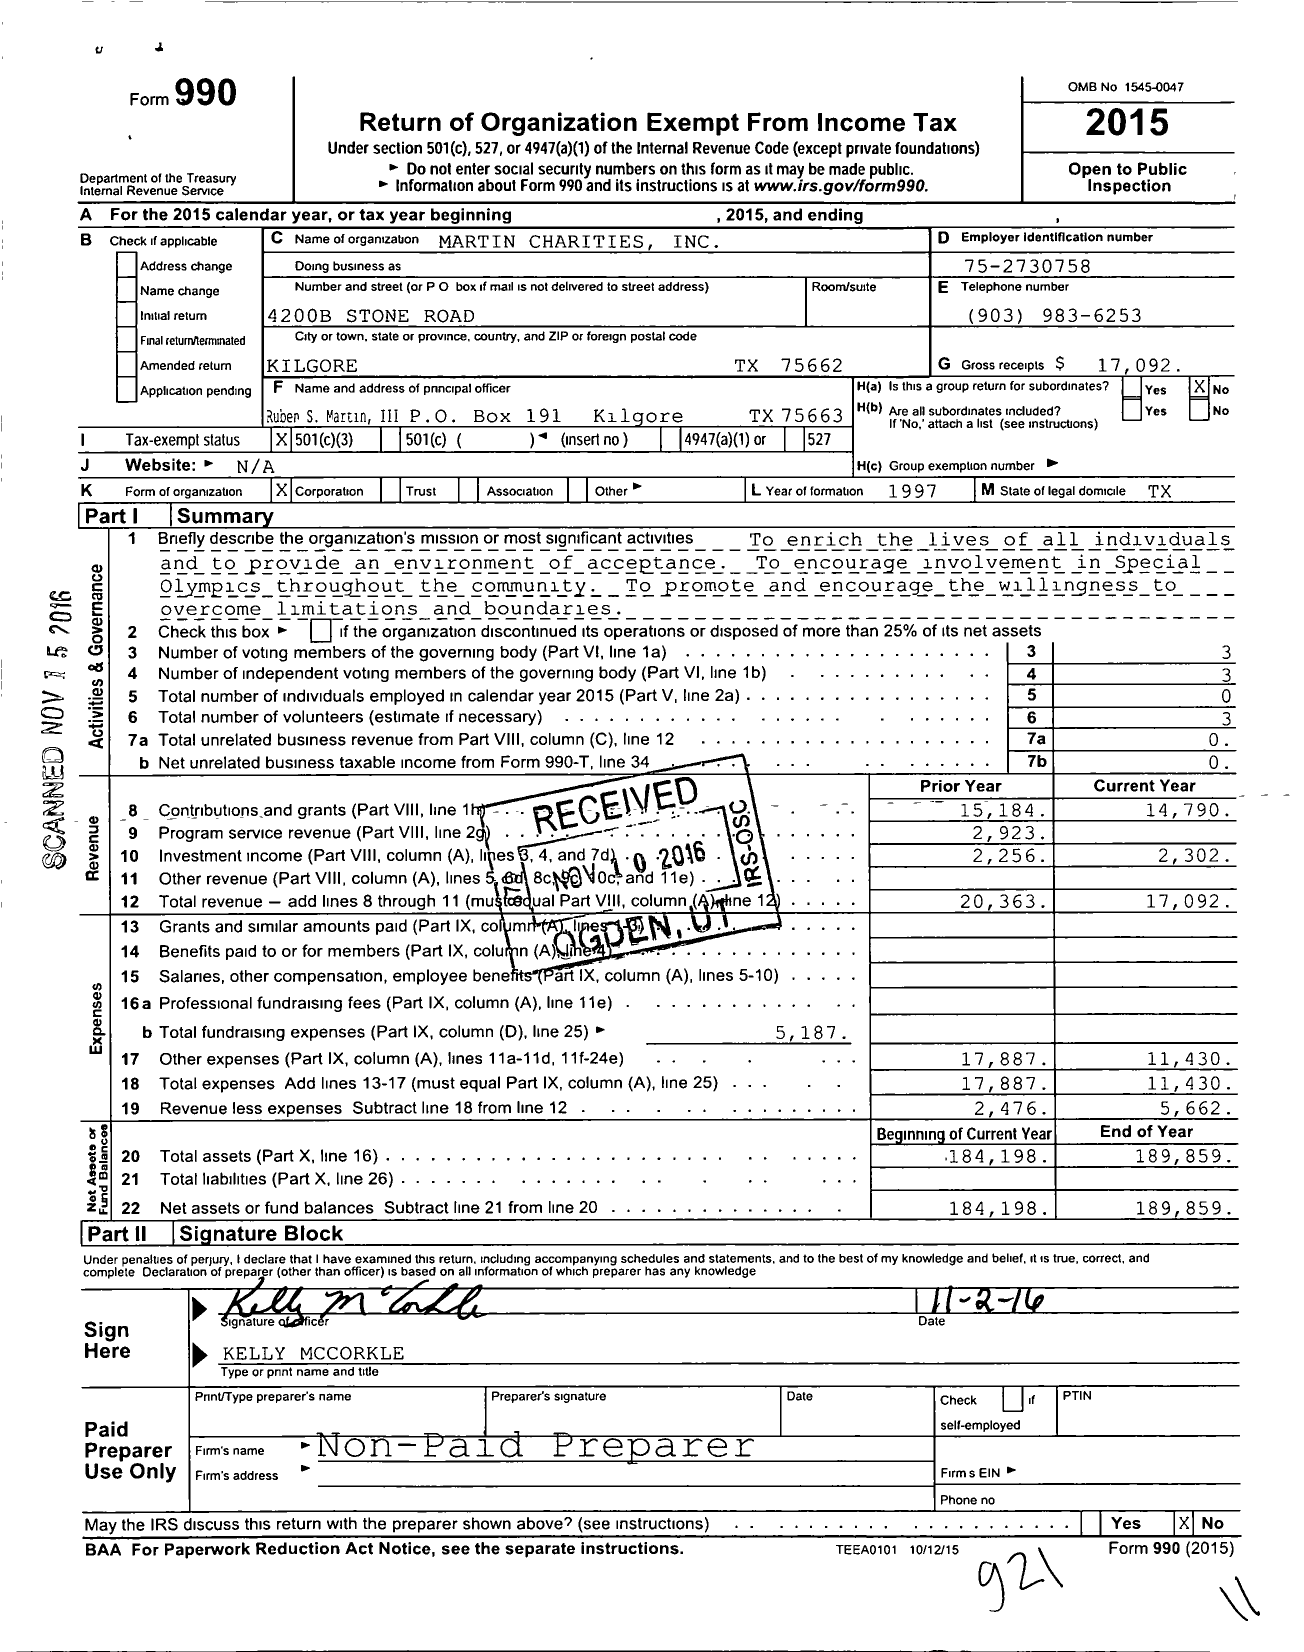 Image of first page of 2015 Form 990 for Martin Charities